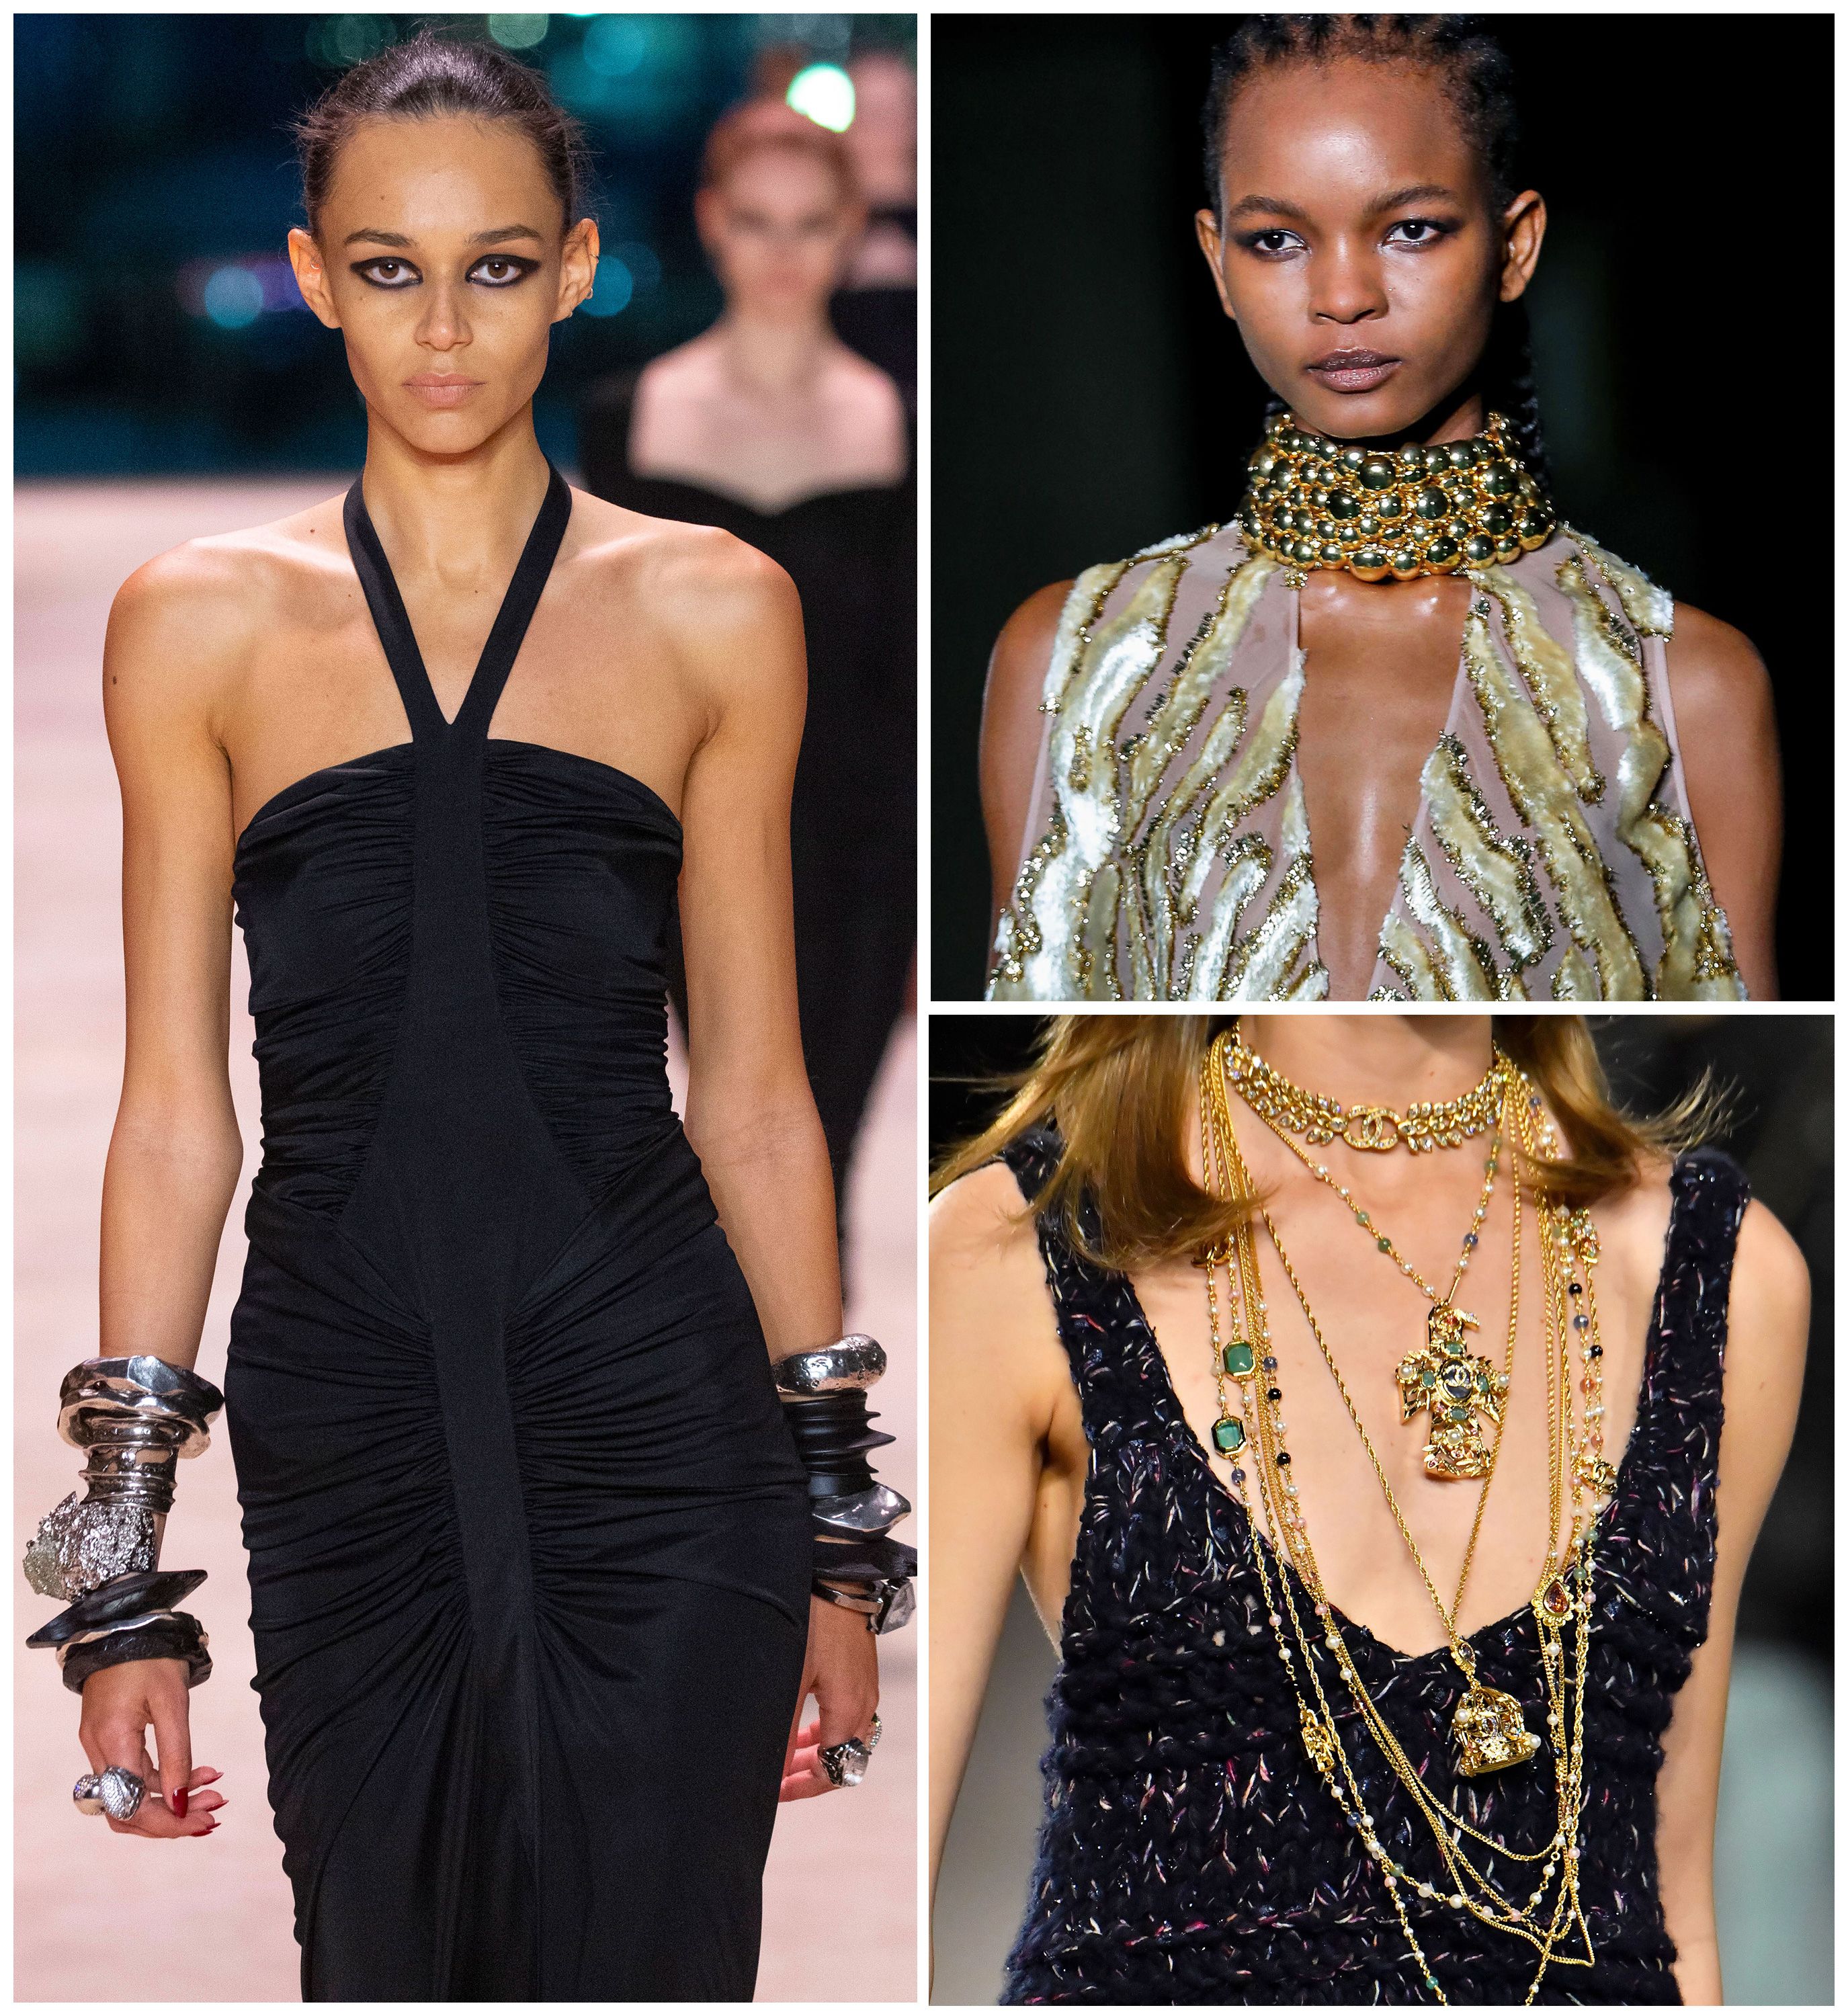 The Winter Jewelry Trends for 2022-2023 Prove More Is More